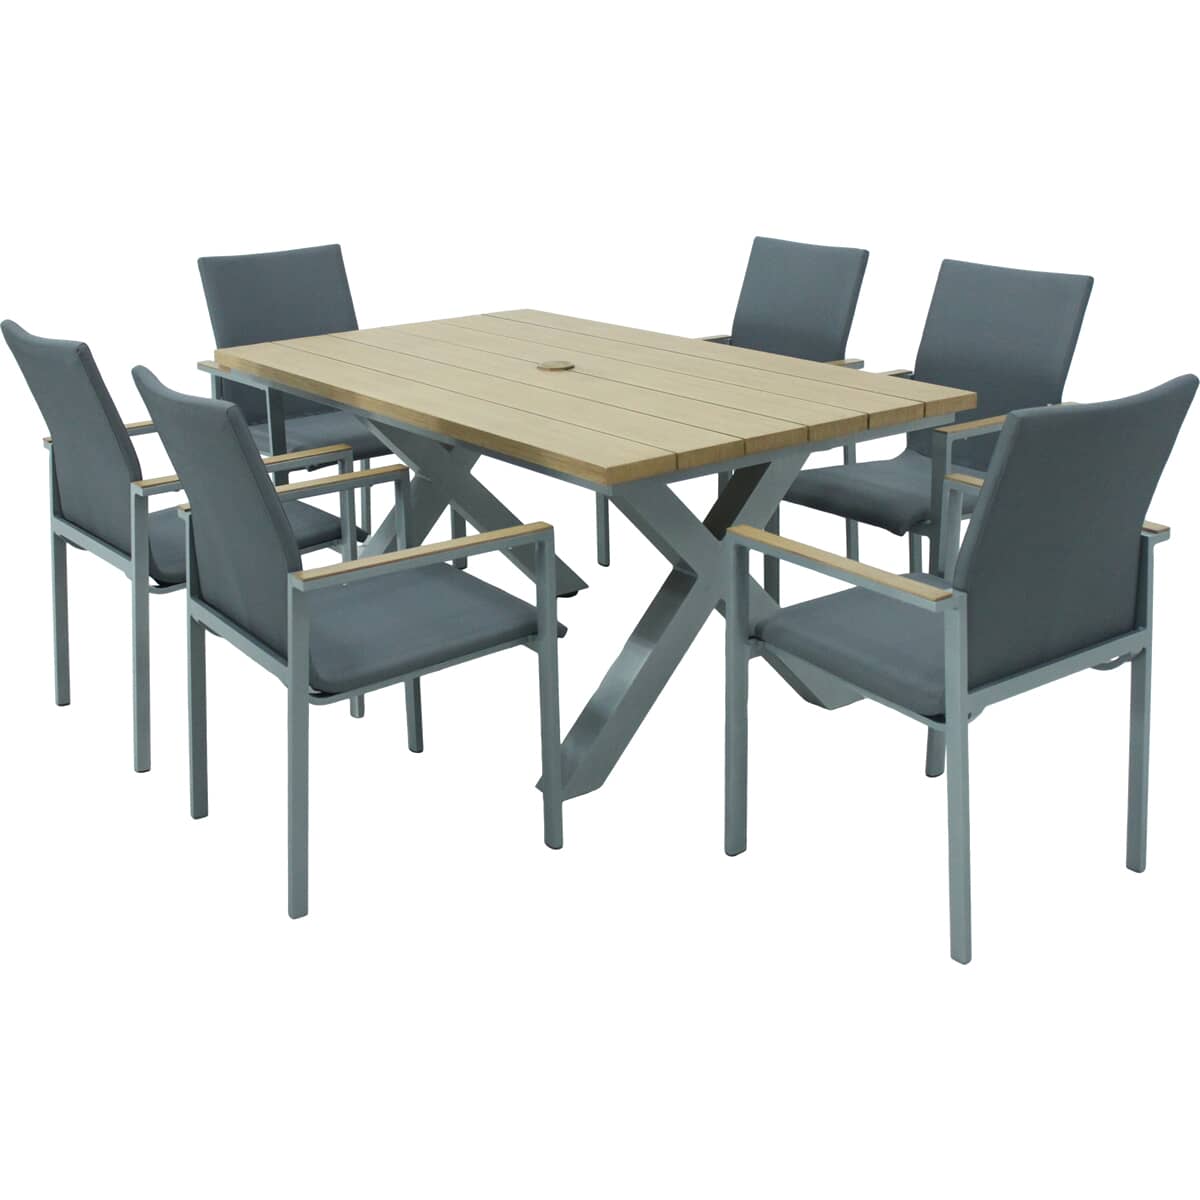 LG Outdoor Siena 6 Seat Dining Set with Stacking Textile Sling Chairs